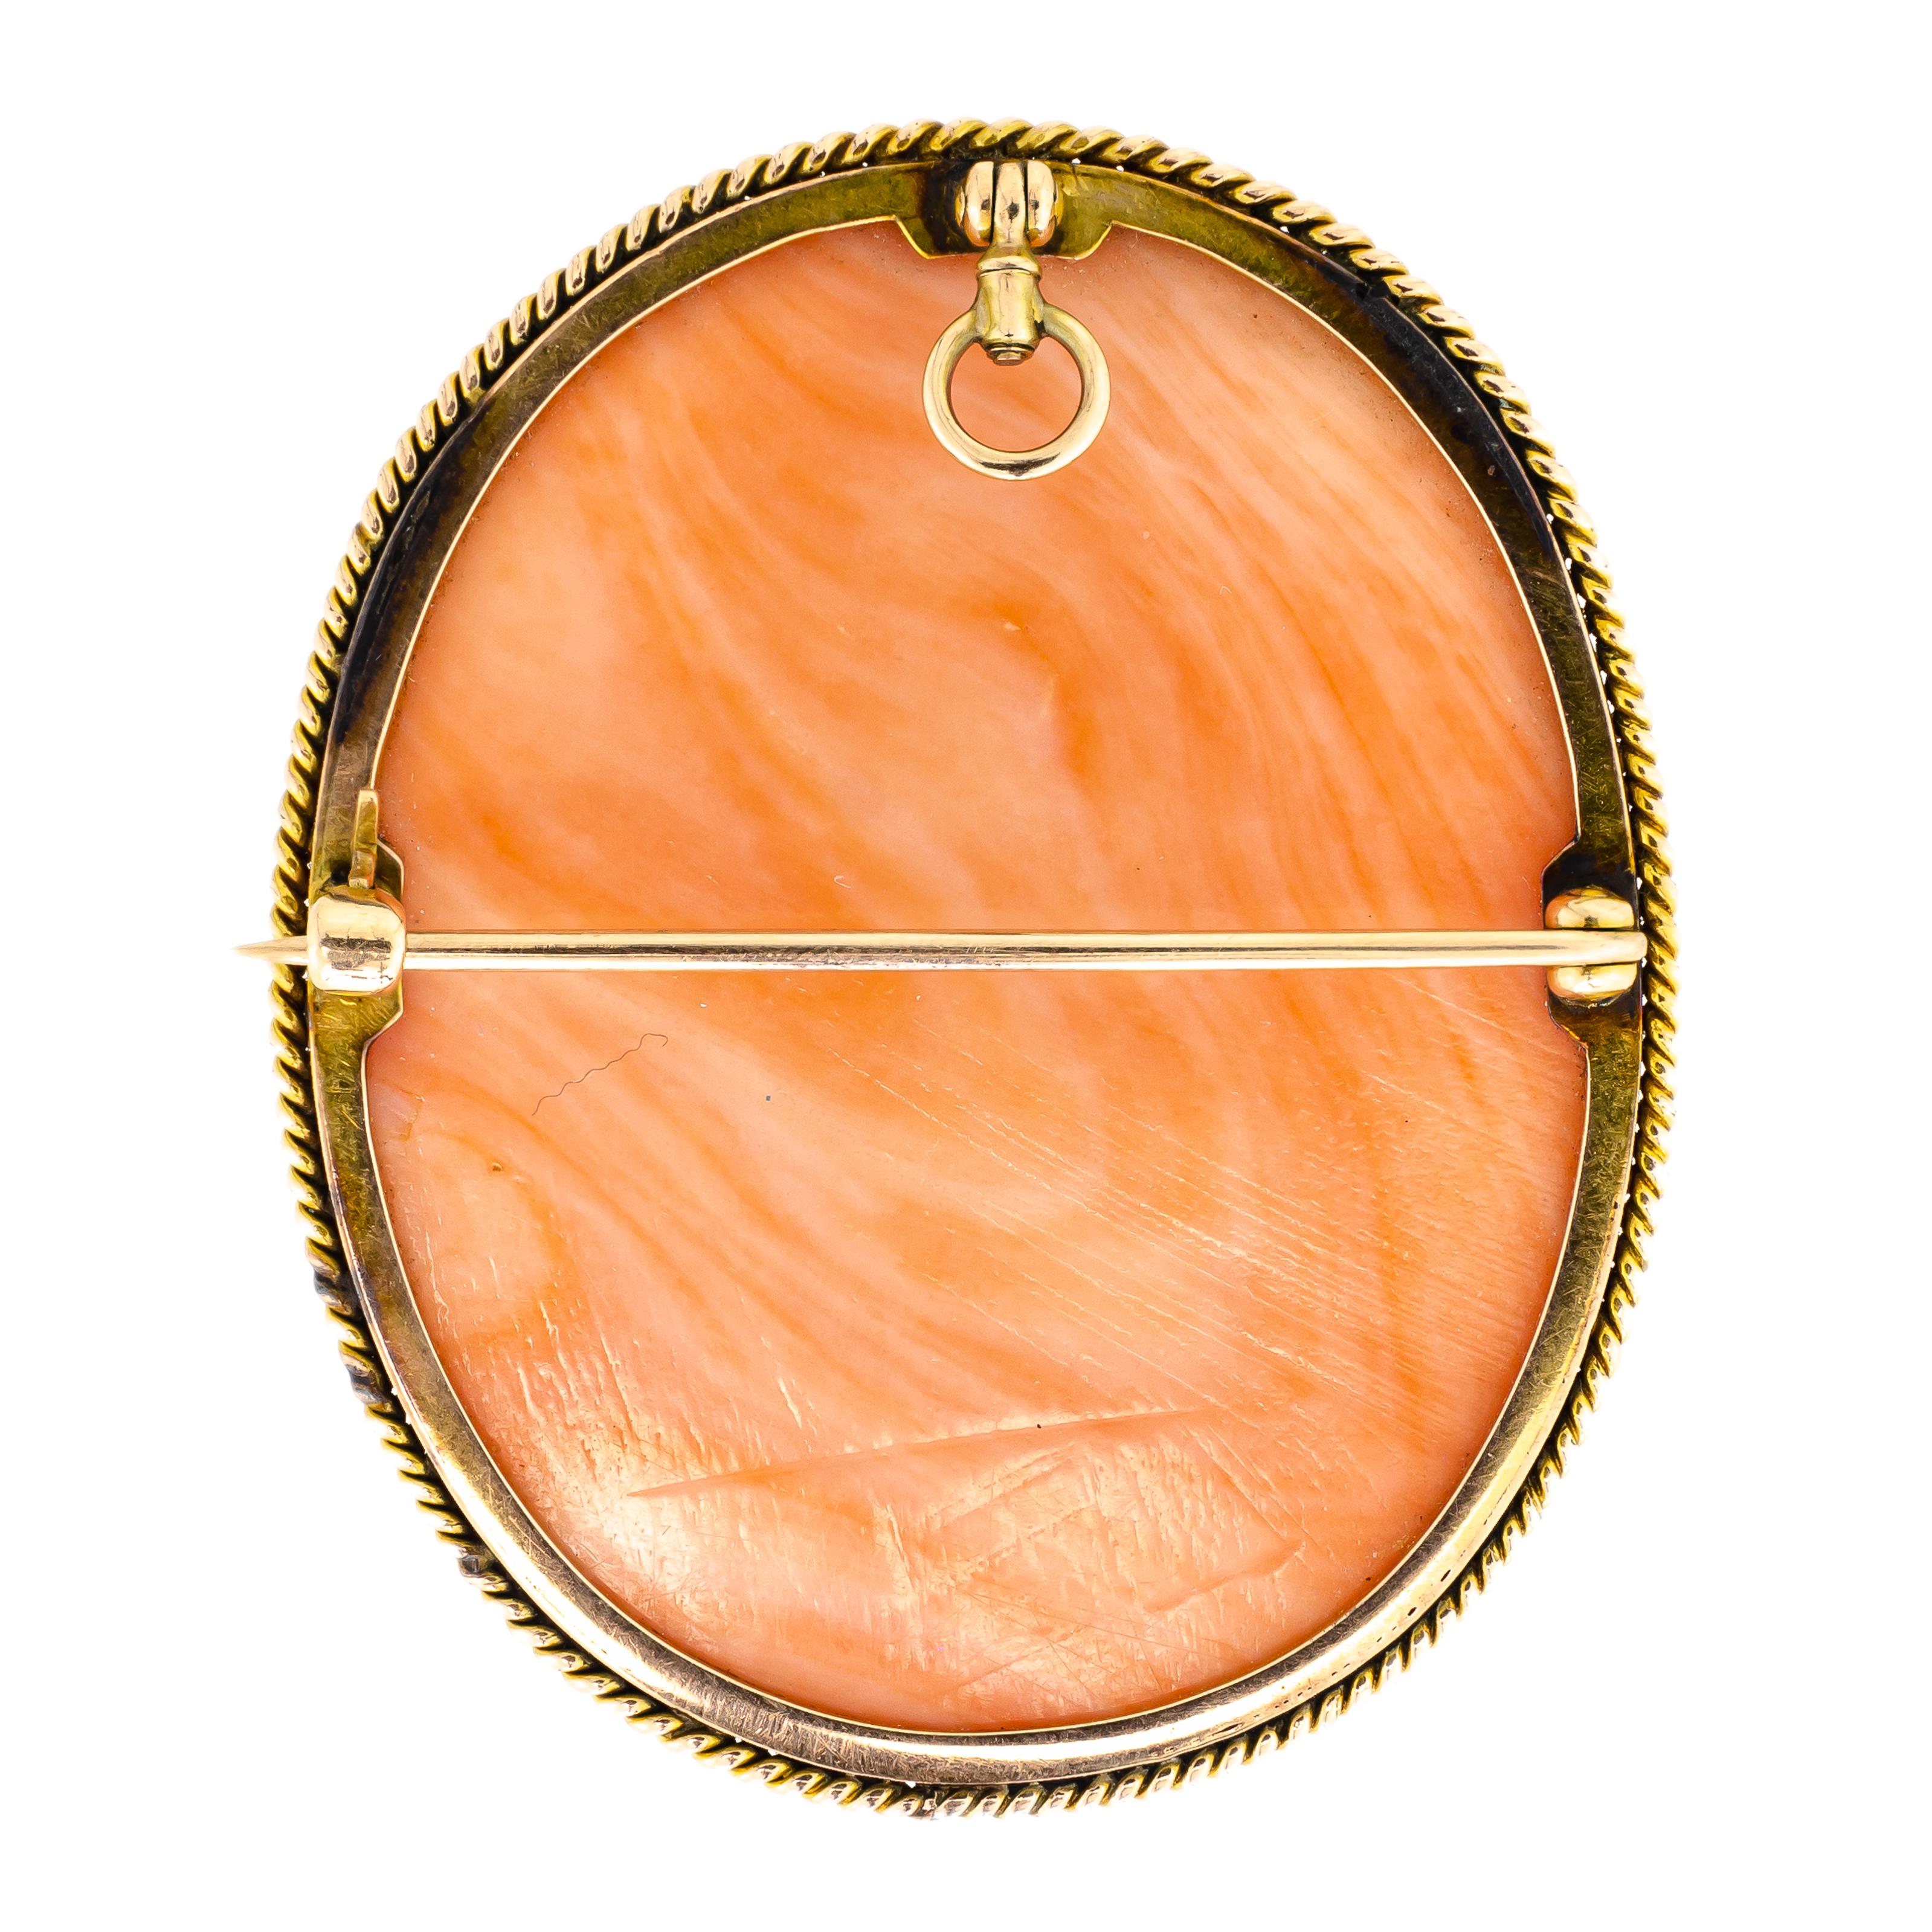 Exquisite large size coral cameo of the Goddess Diana in Profile mounted in rope-twist design 14kt yellow gold frame with retractable bail so it can be worn as a pendant - all original fittings Antique Victorian piece - rendered with fine details